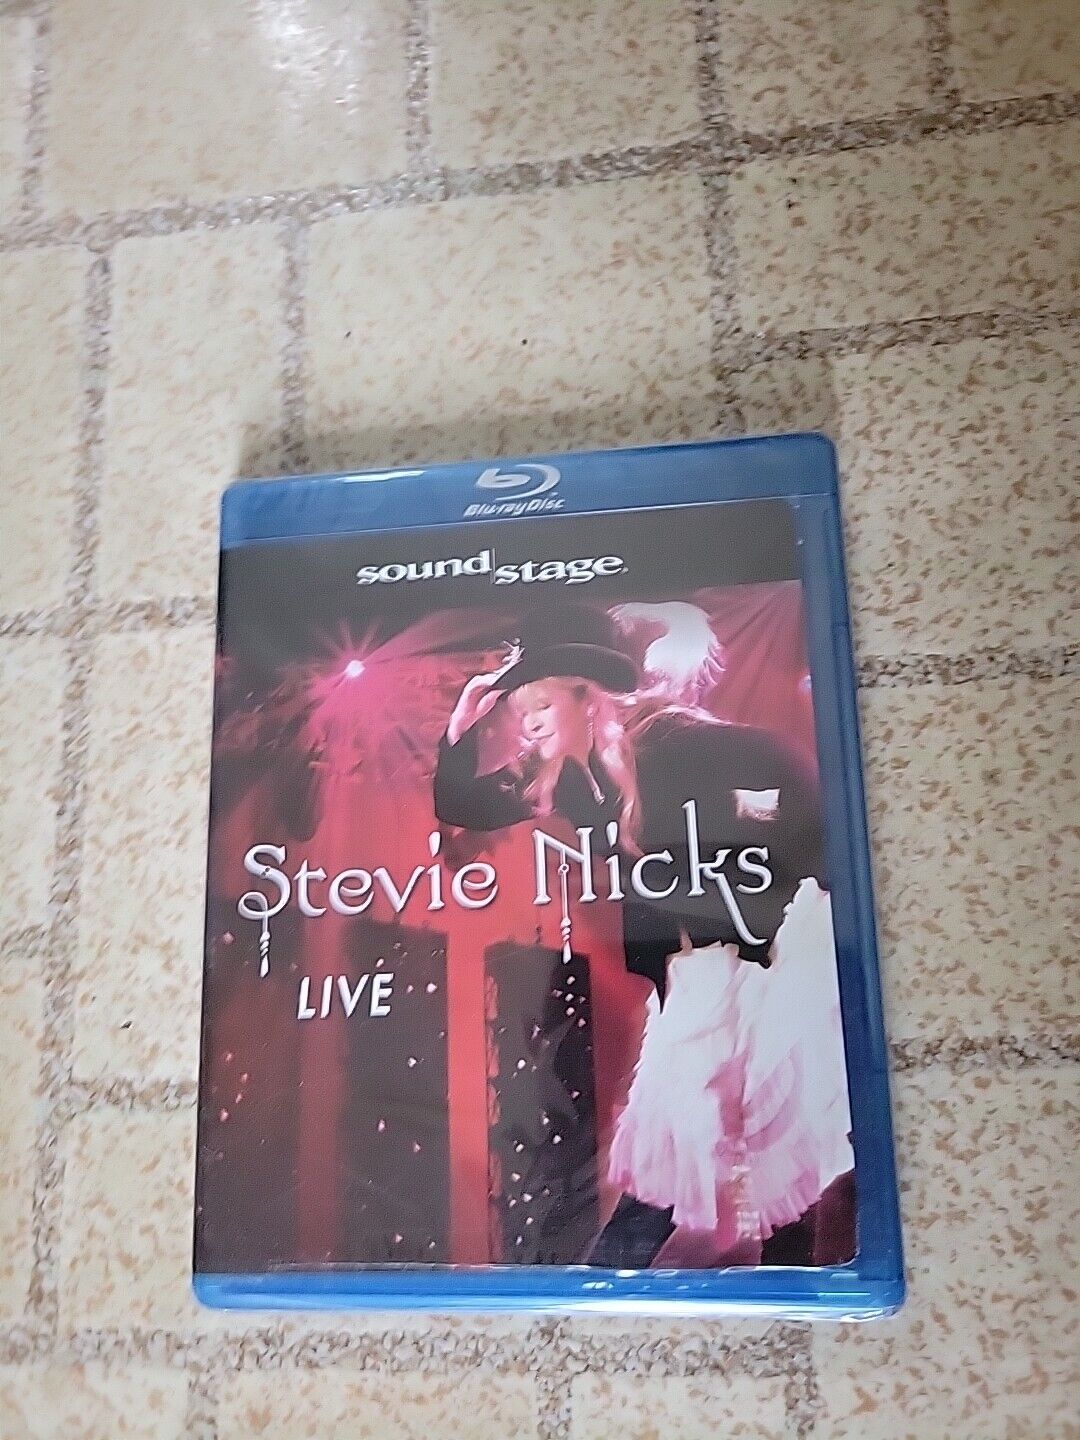 STEVIE NICKS LIVE (Sound Stage, 2008, Blu-ray) BRAND NEW Factory Sealed OOP RARE